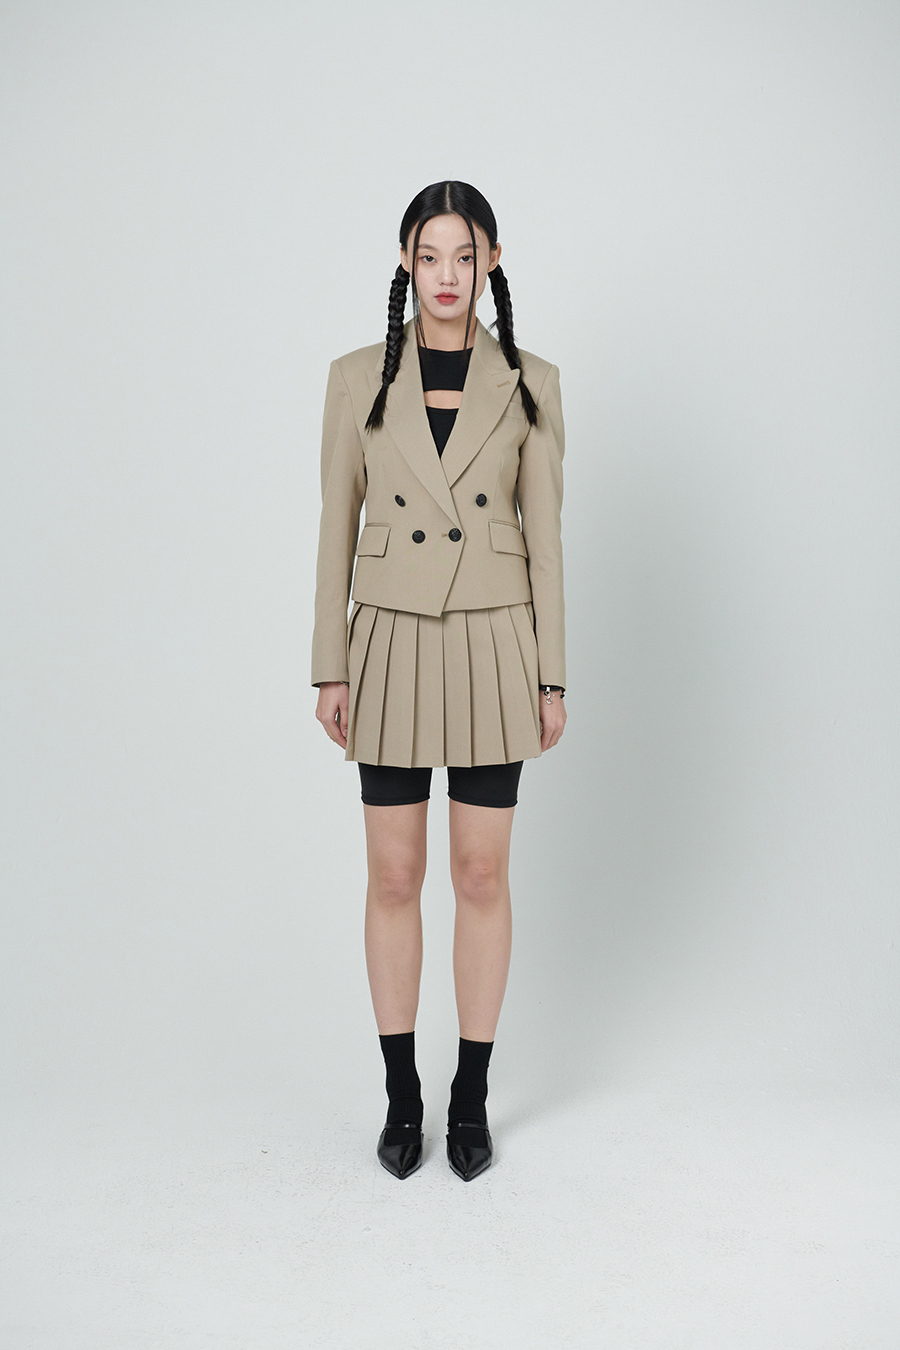 [ITZY 유나, 에스파, 태연, 진지희, 레드벨벳 예리, 이유비 착용] Tailored cropped suit jacket